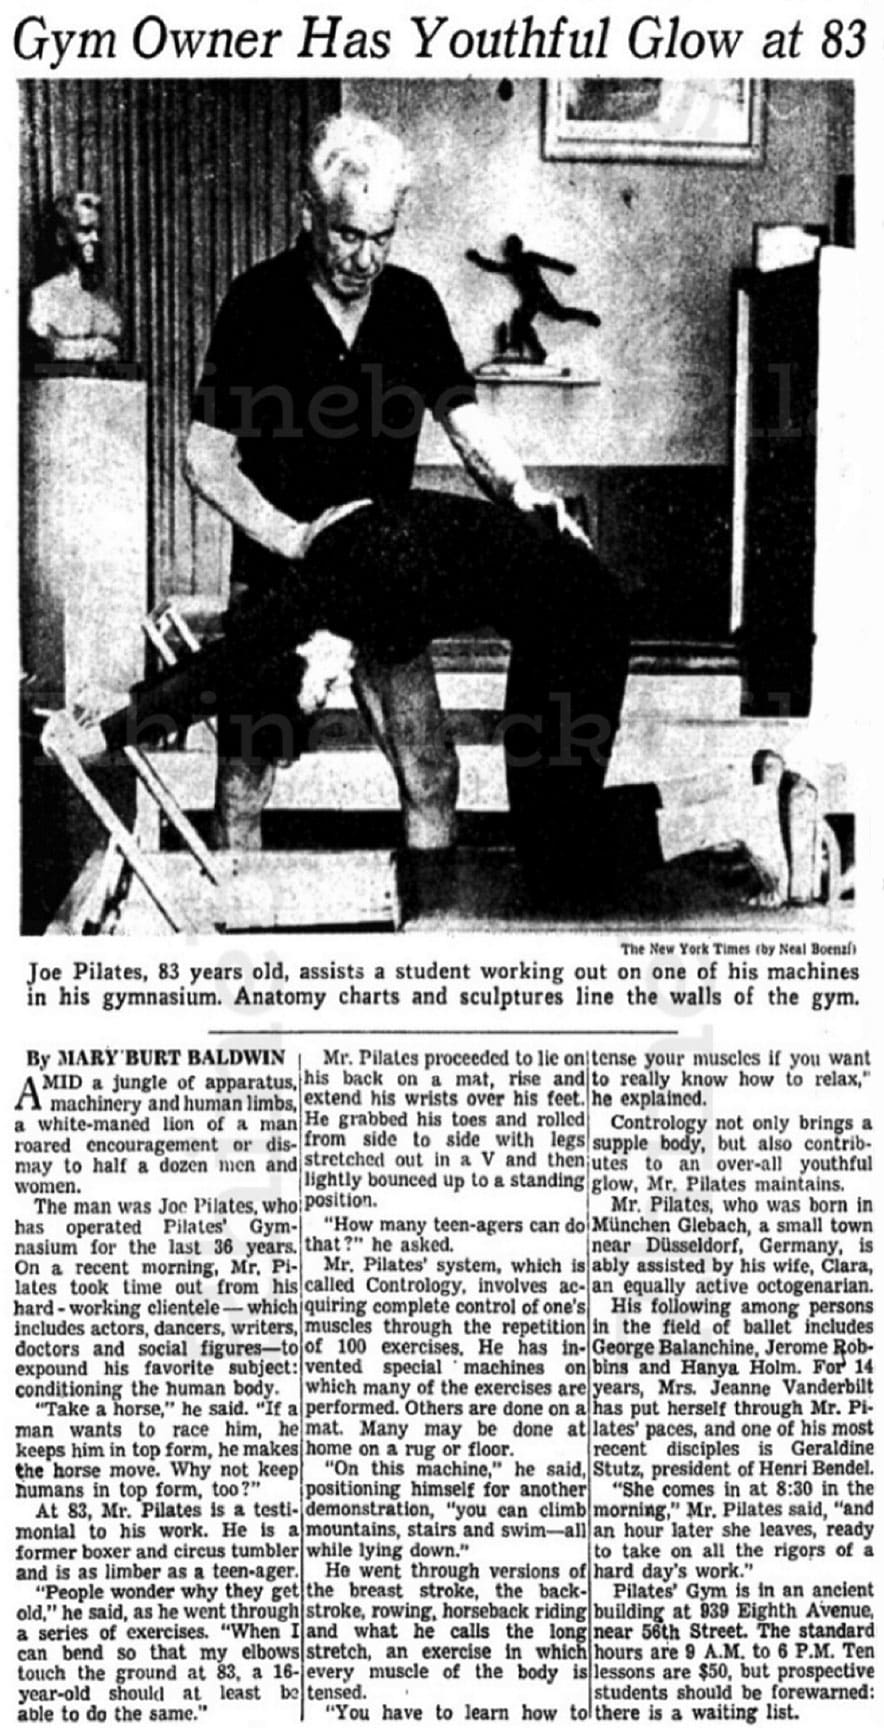 Joseph Pilates gym owner youthful glow pilates archive article